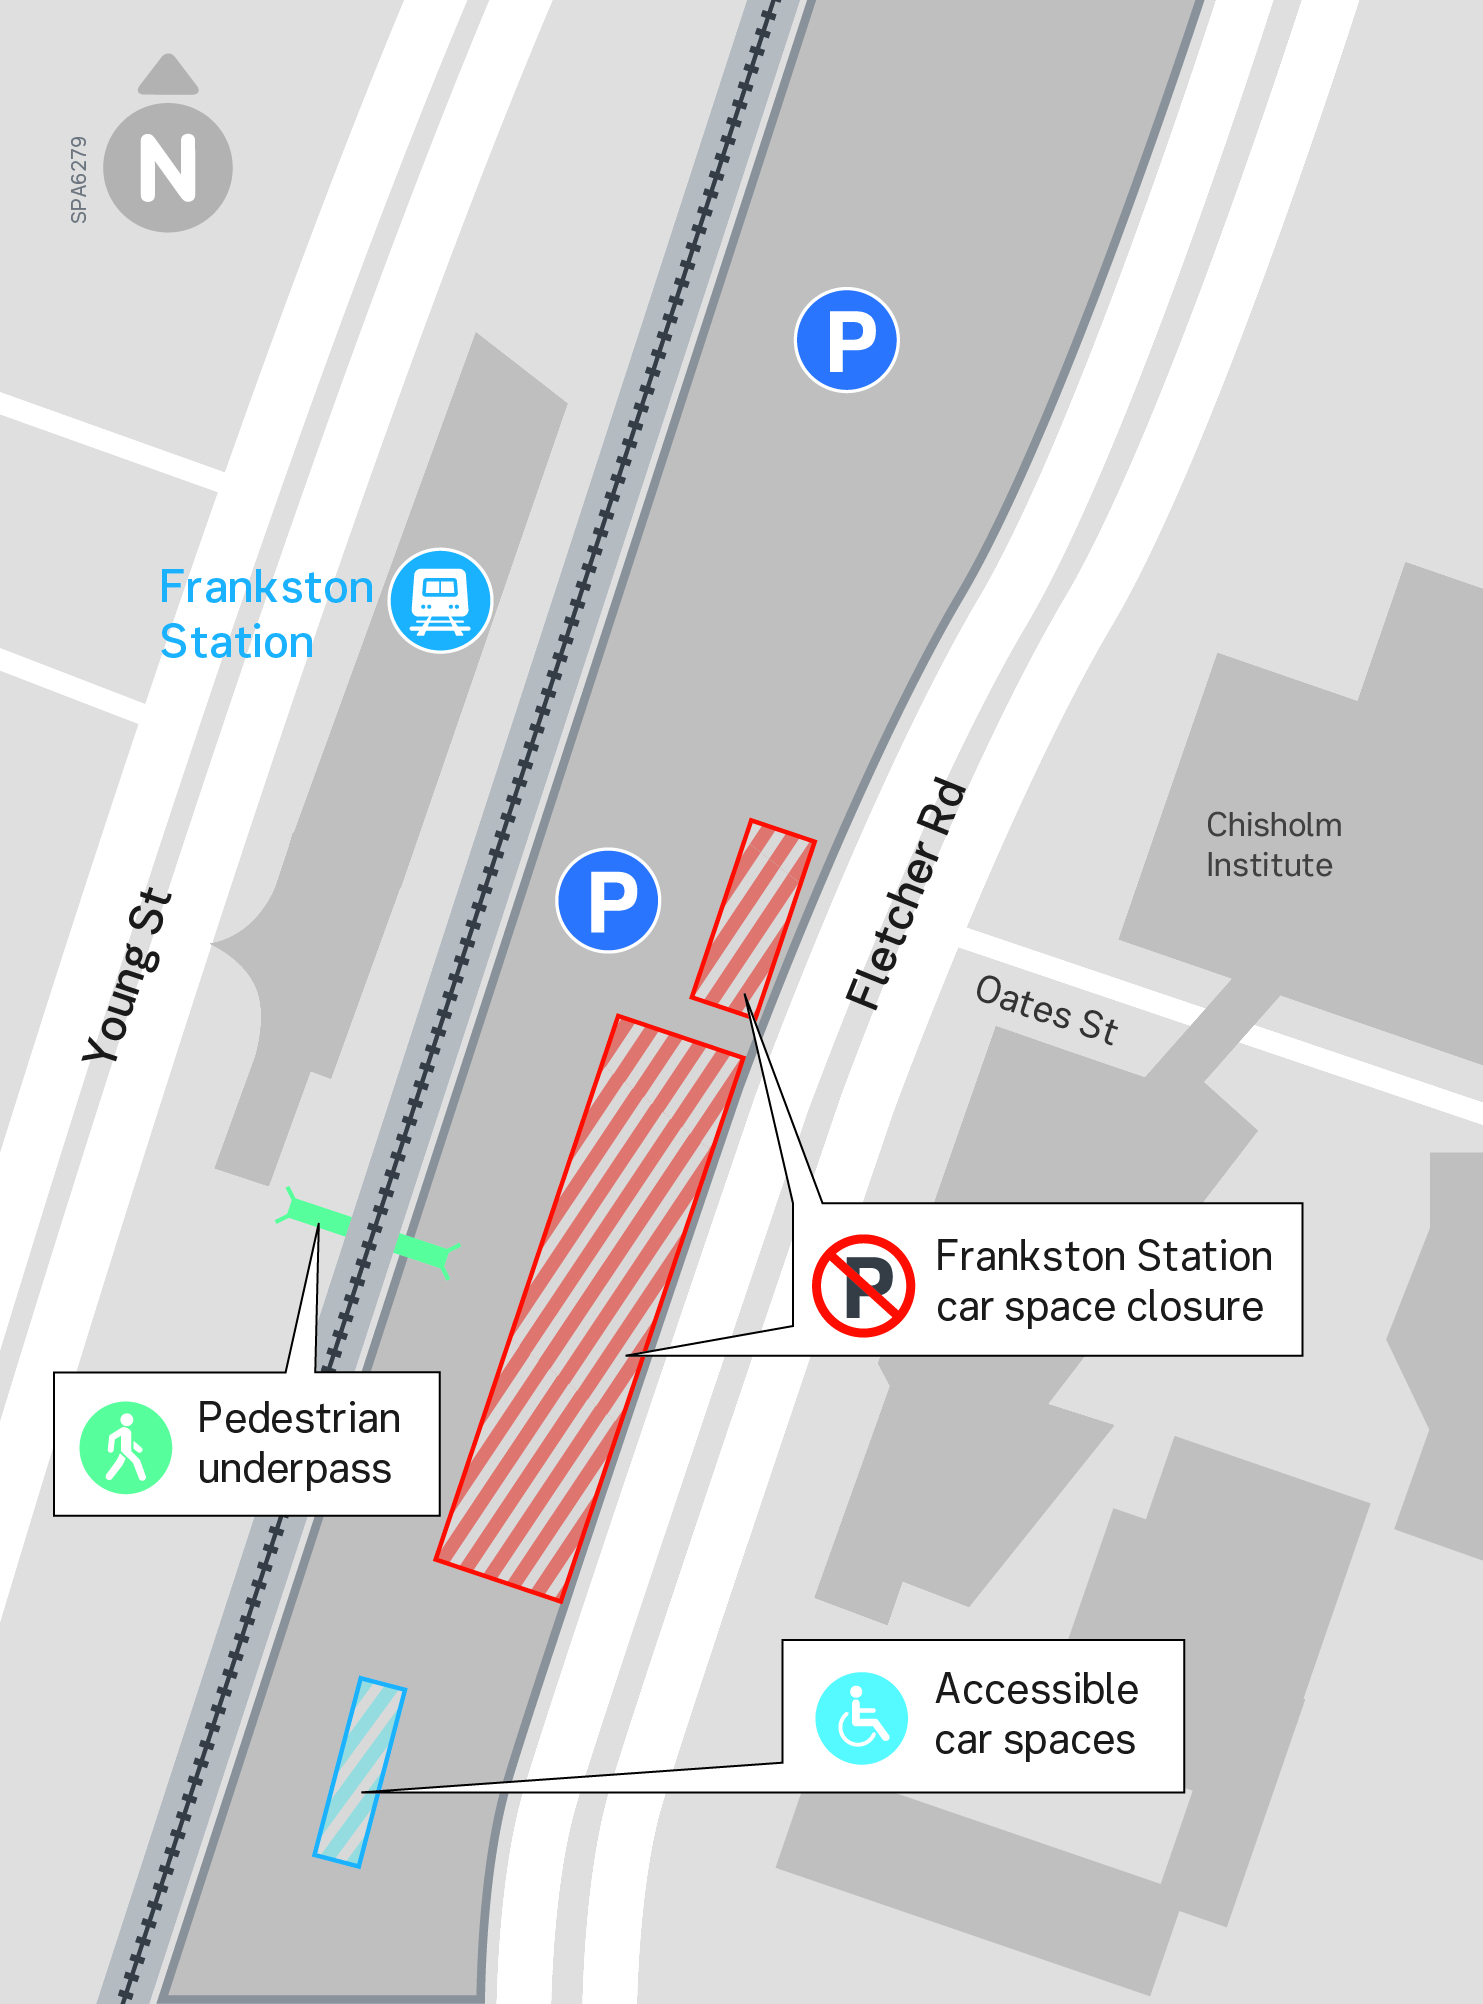 Frankston car space closure - click to view larger version of map